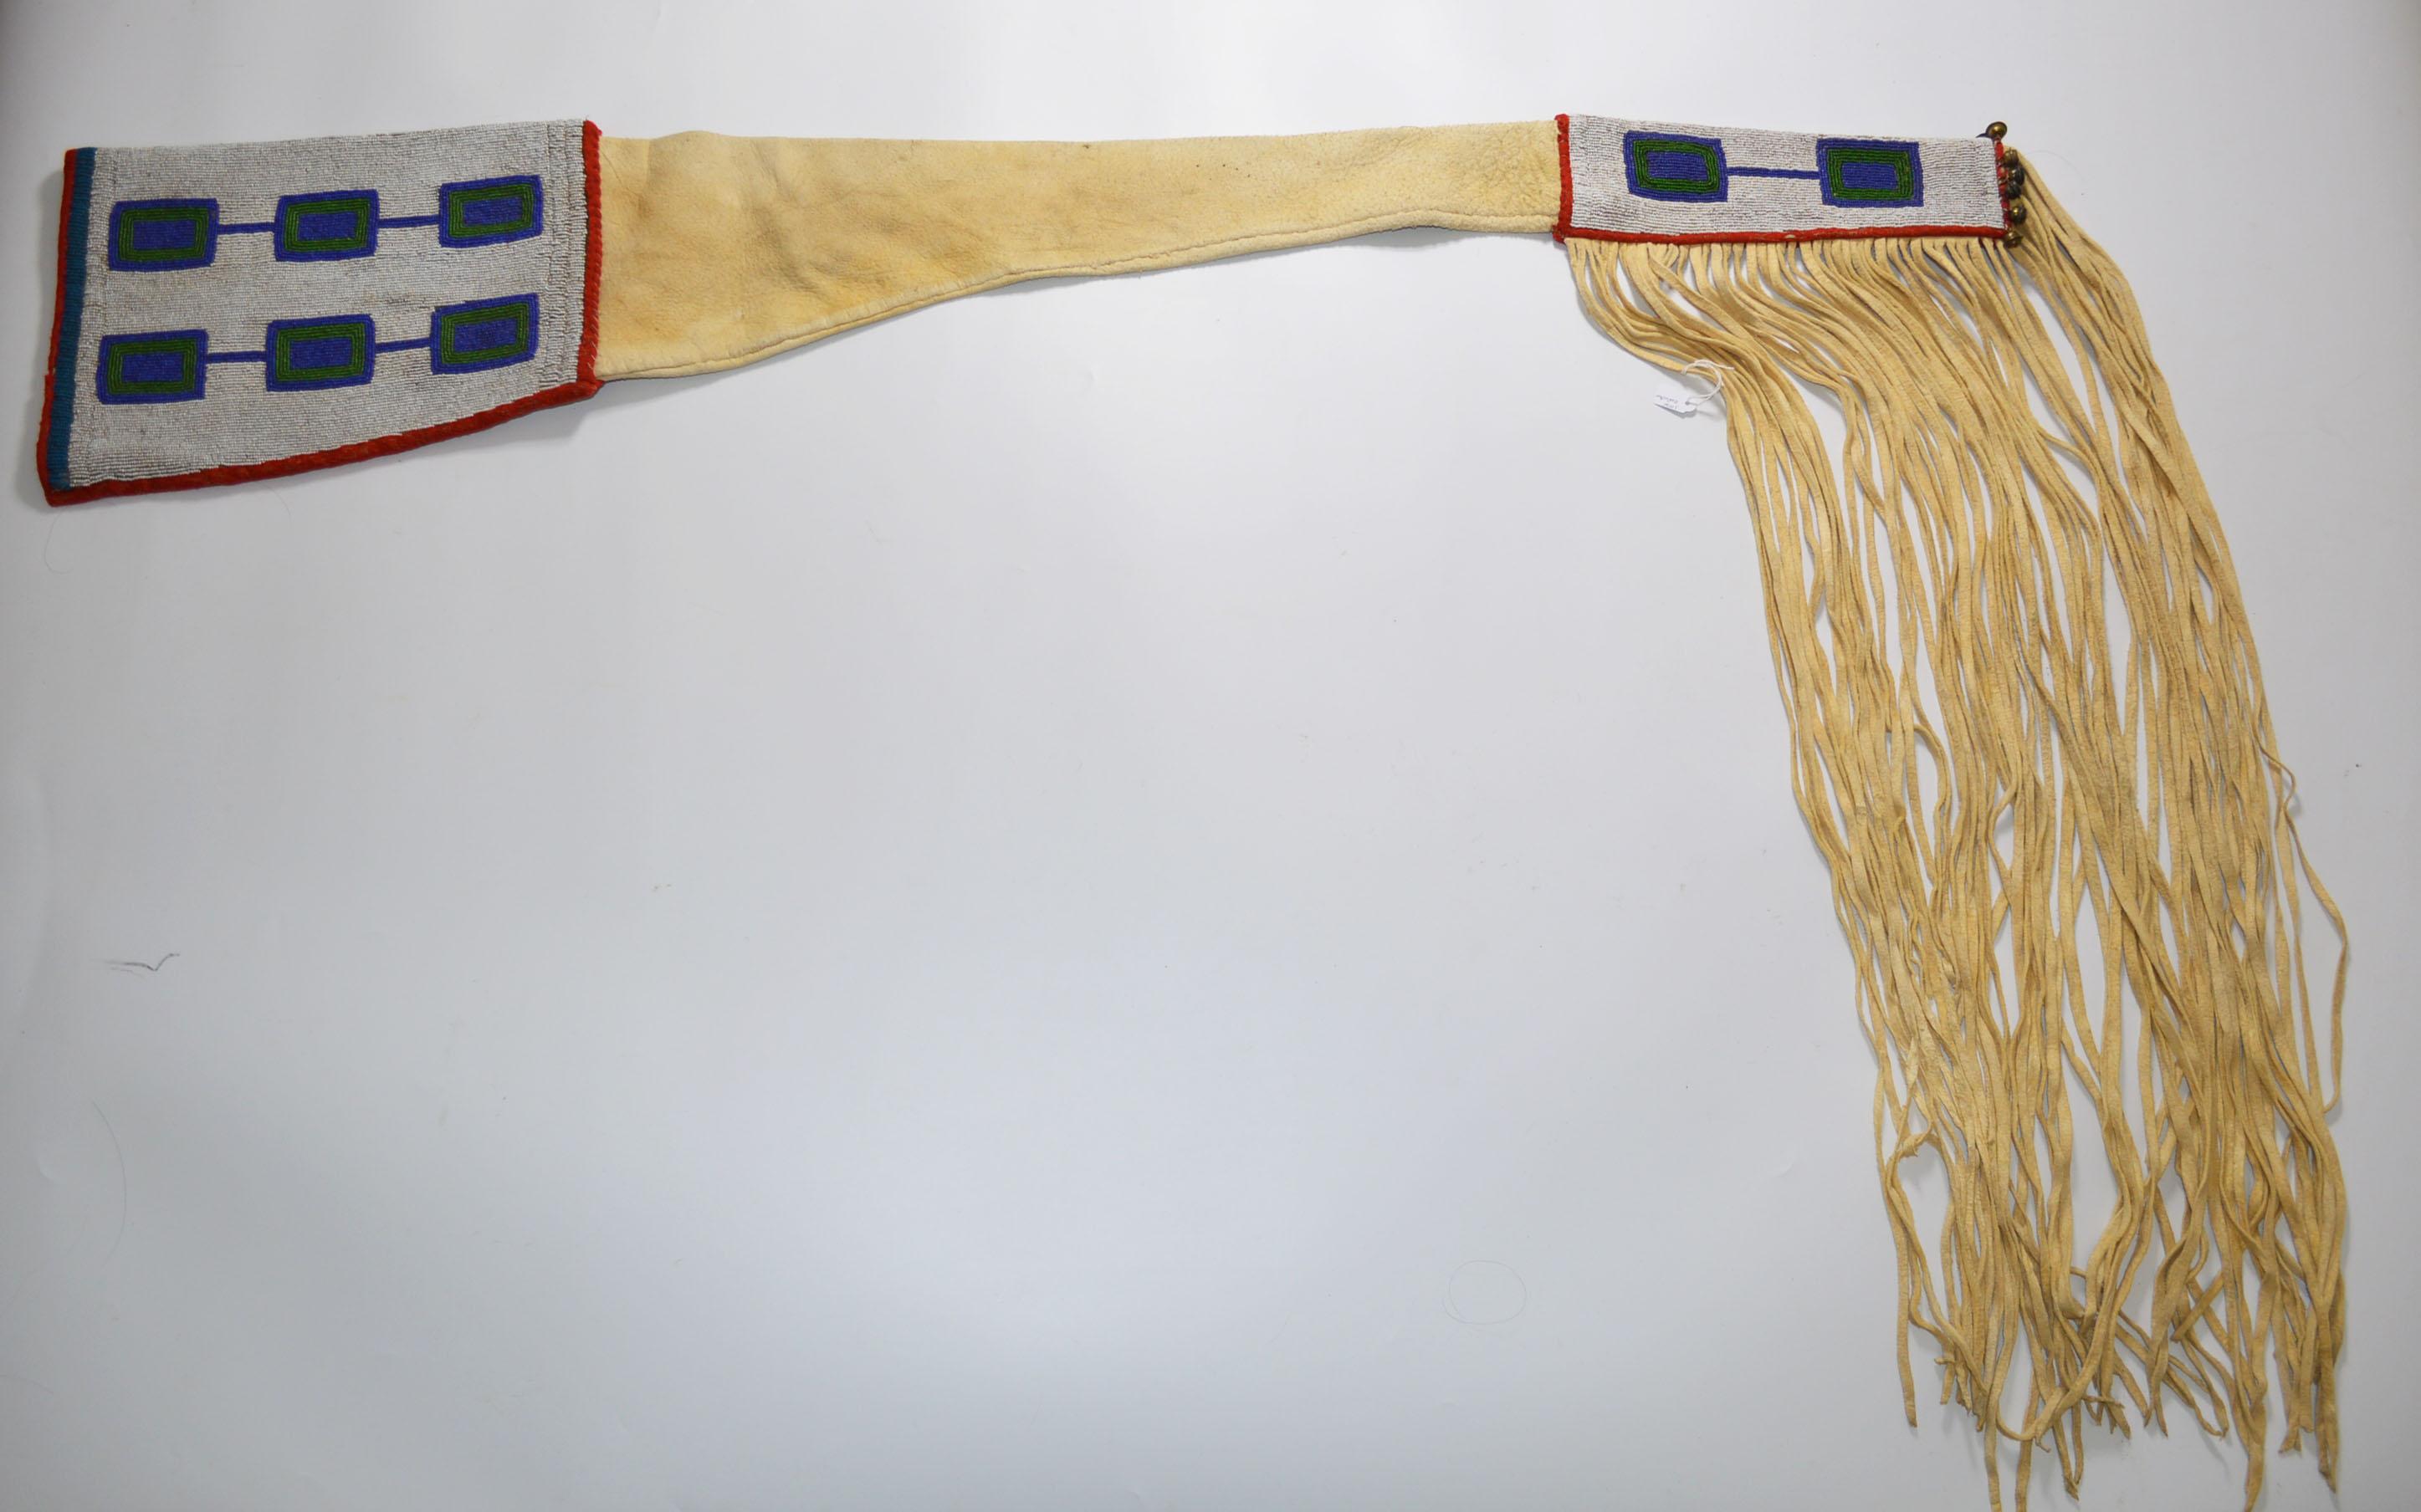 A Native American Indian Blackfoot beaded rifle cover
 Buckskin with colored glass beads canvas cloth and bells, 
Finely beaded white background with panels of blue and red linked rectangles
Period: Last quarter of the 19th century
Condition: